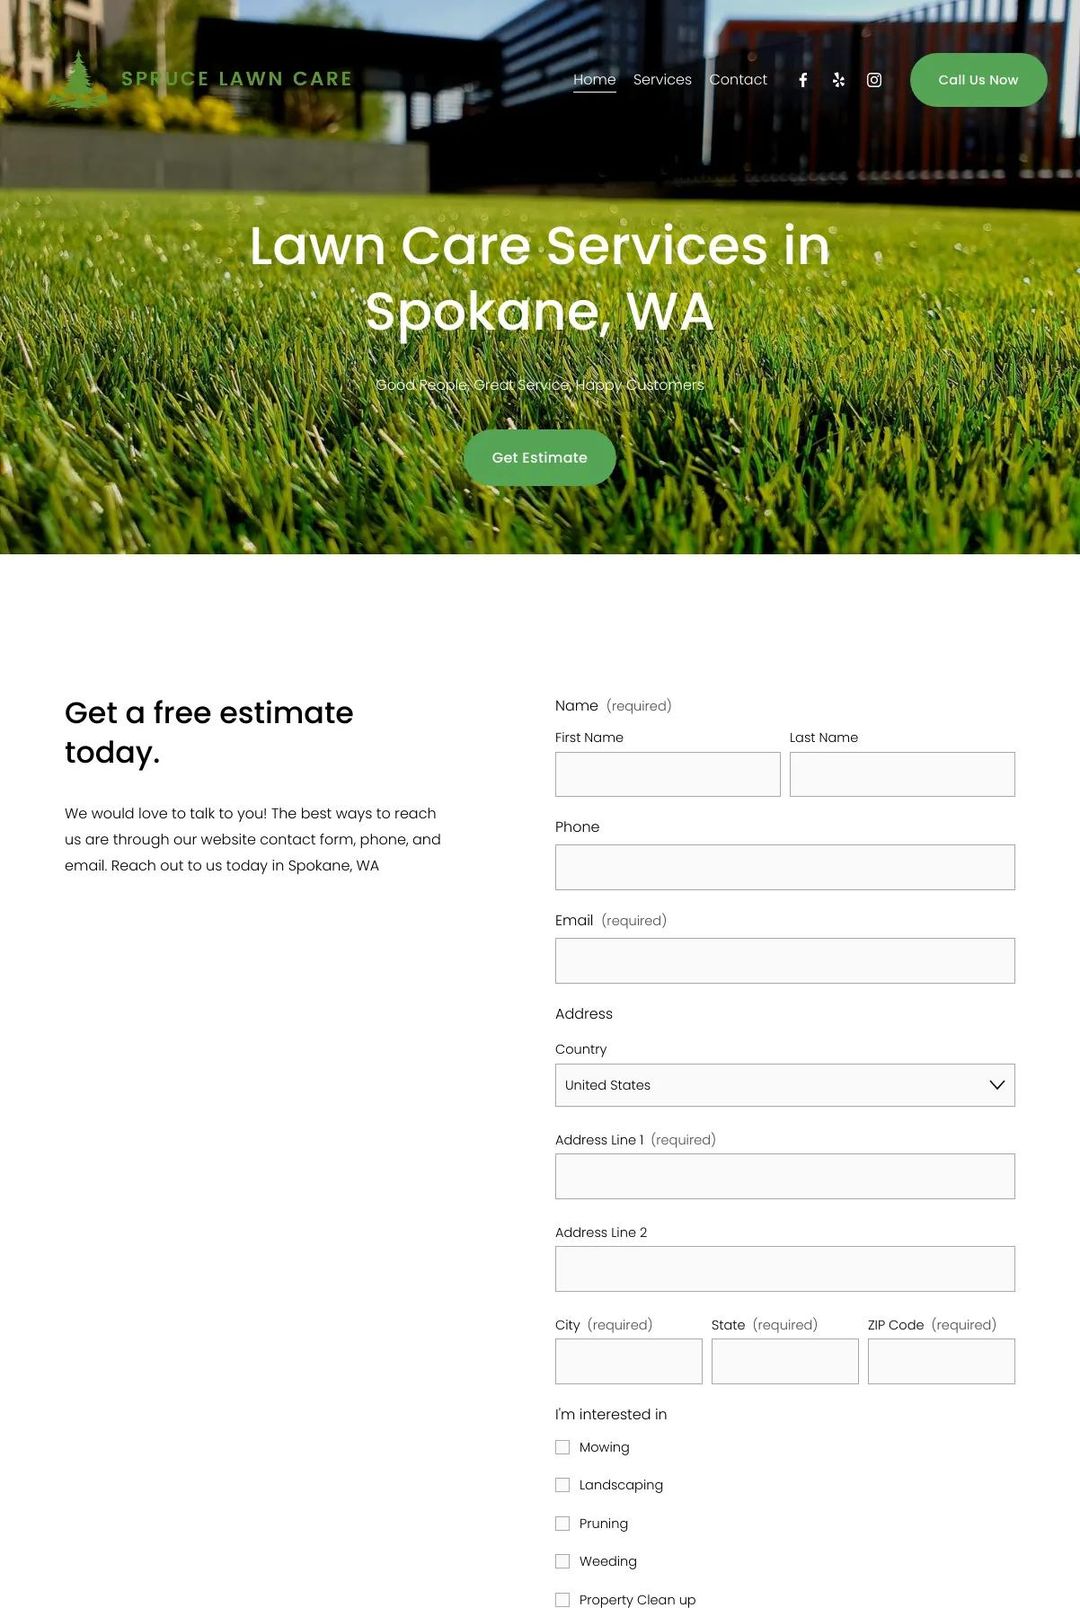 Screenshot 1 of Spruce Lawn Care (Example Squarespace Lawn Care Website)